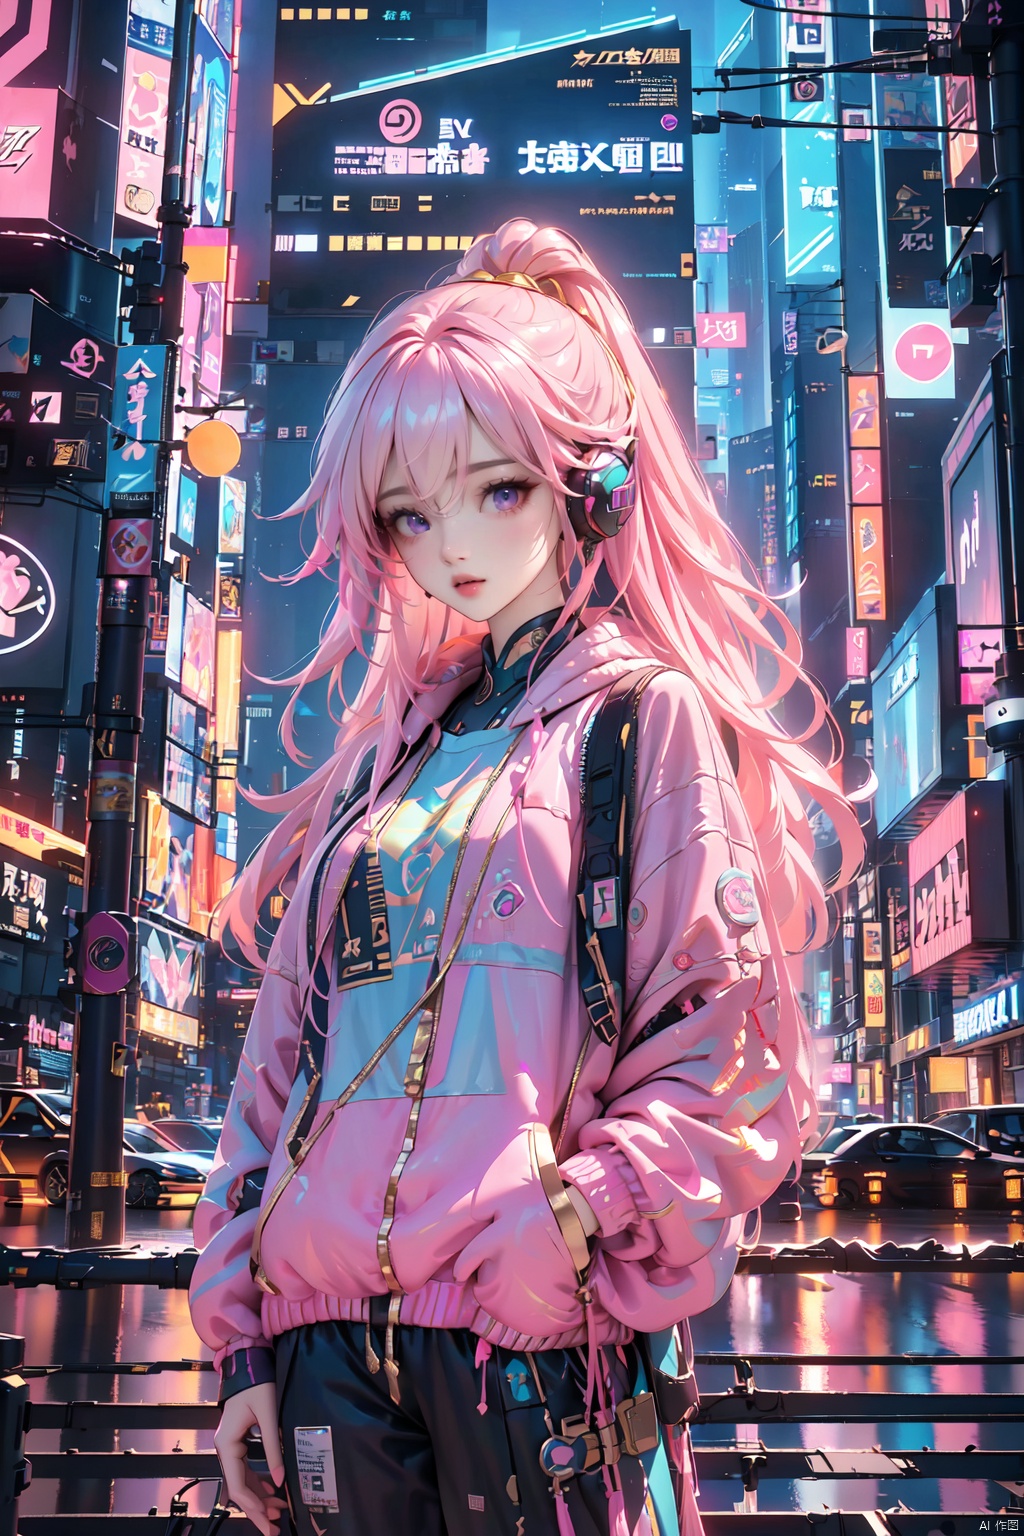  Dreampolis, hyper-detailed digital illustration, cyberpunk, single girl with techsuite hoodie and headphones in the street, neon lights, lighting bar,(pink|gold|Gradient hair),purple eyes,city, cyberpunk city, film still, backpack, in megapolis, pro-lighting, high-res, masterpiece, (/qingning/), (\MBTI\), (\shen ming shao nv\), Light master,standing